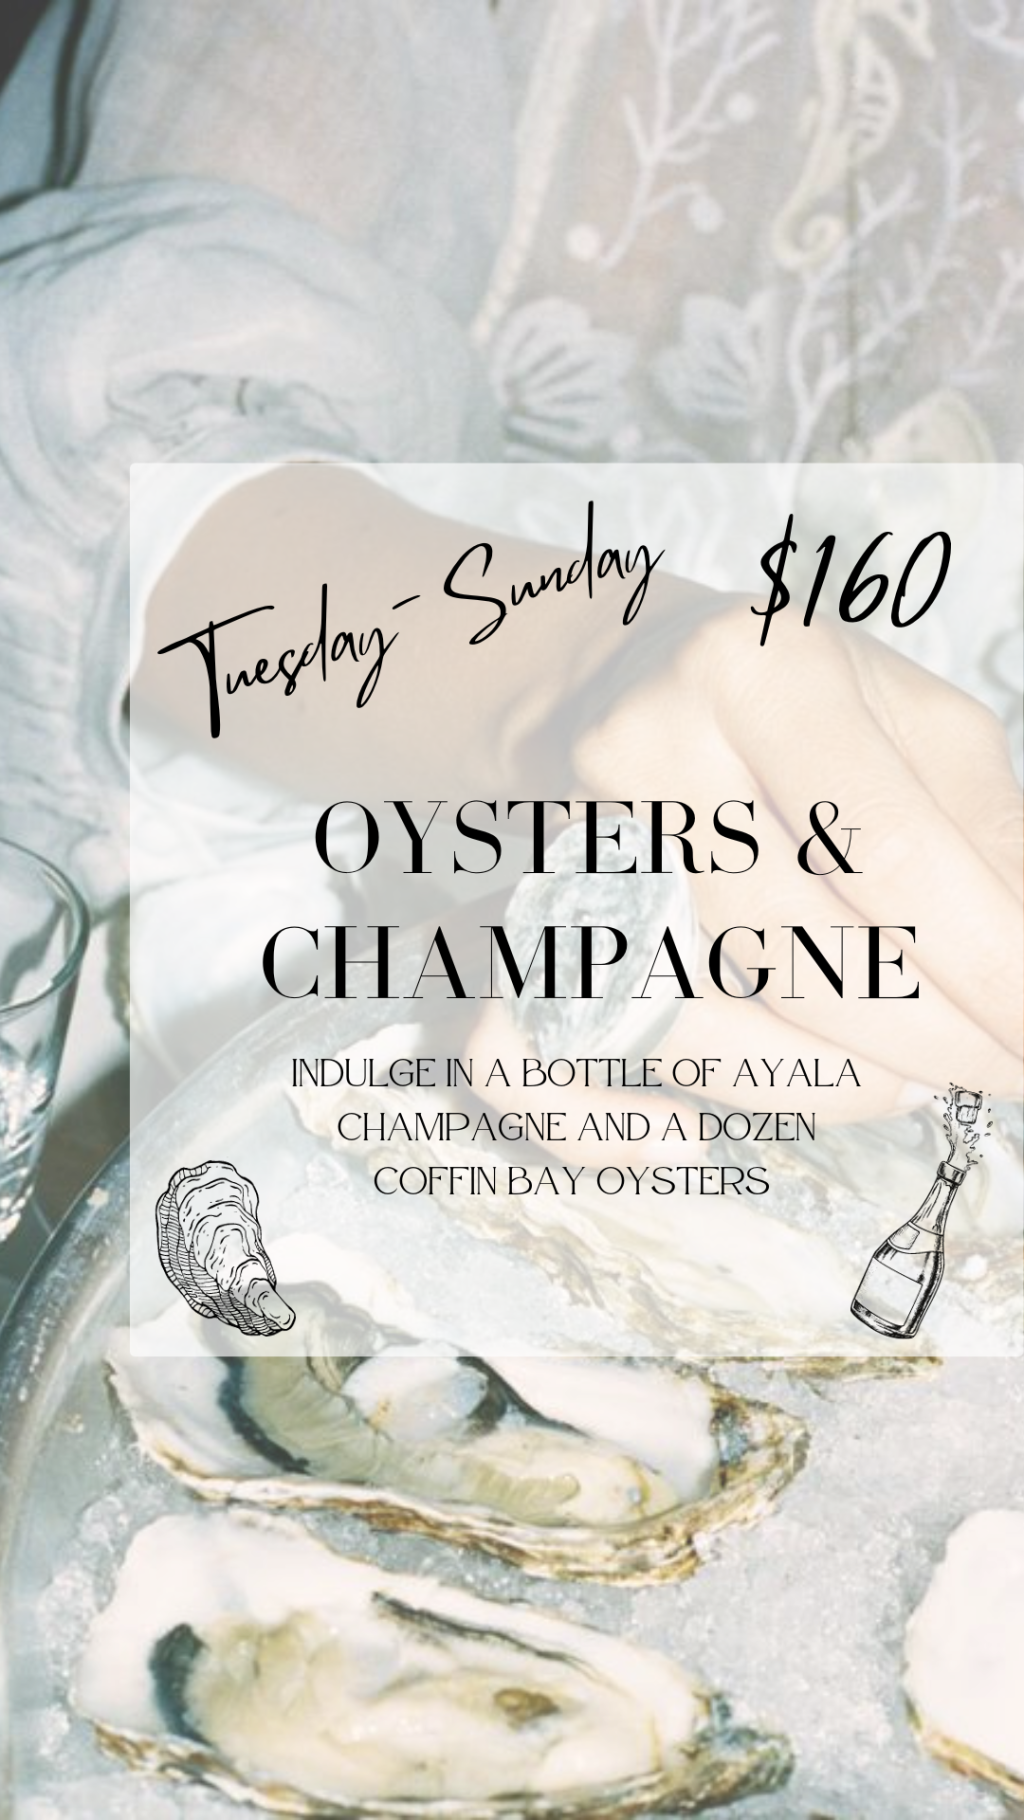 Oysters & Champagne